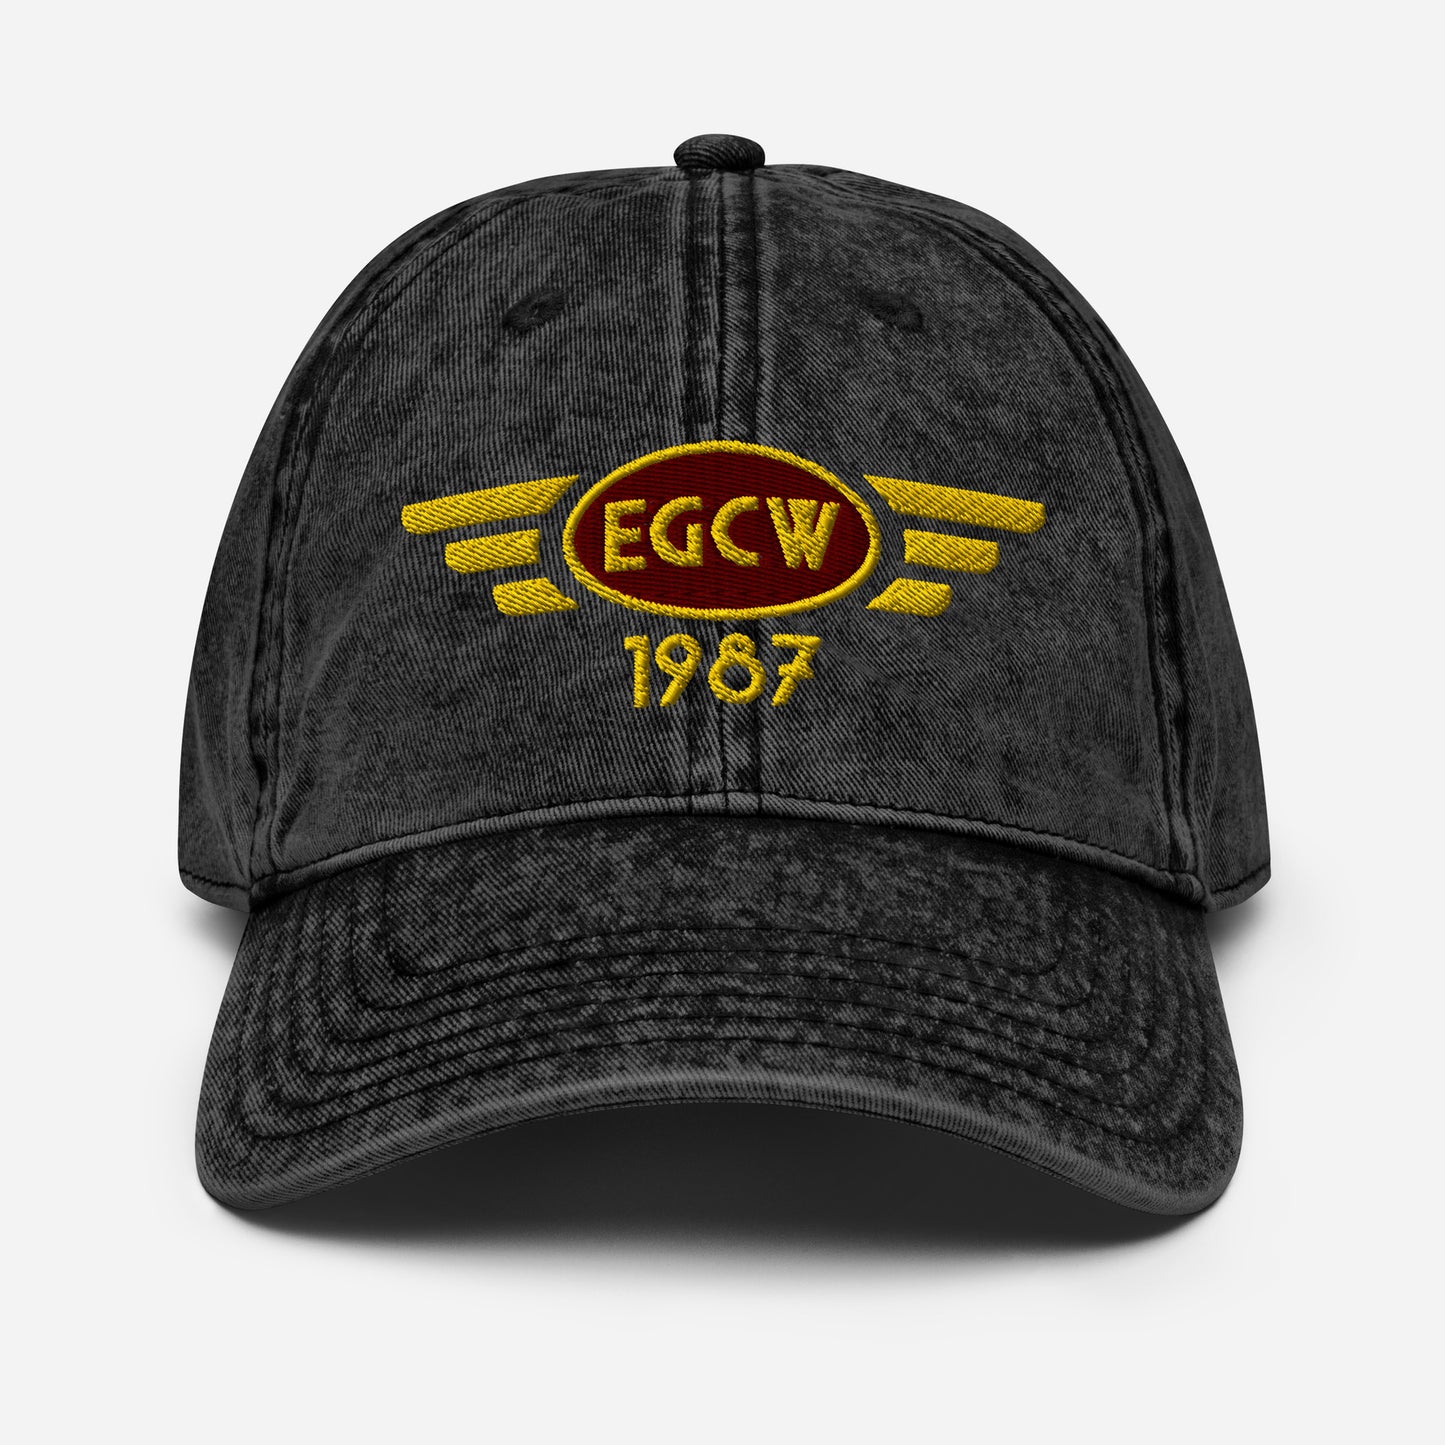 Welshpool Airport vintage cotton twill baseball cap with embroidered ICAO code.